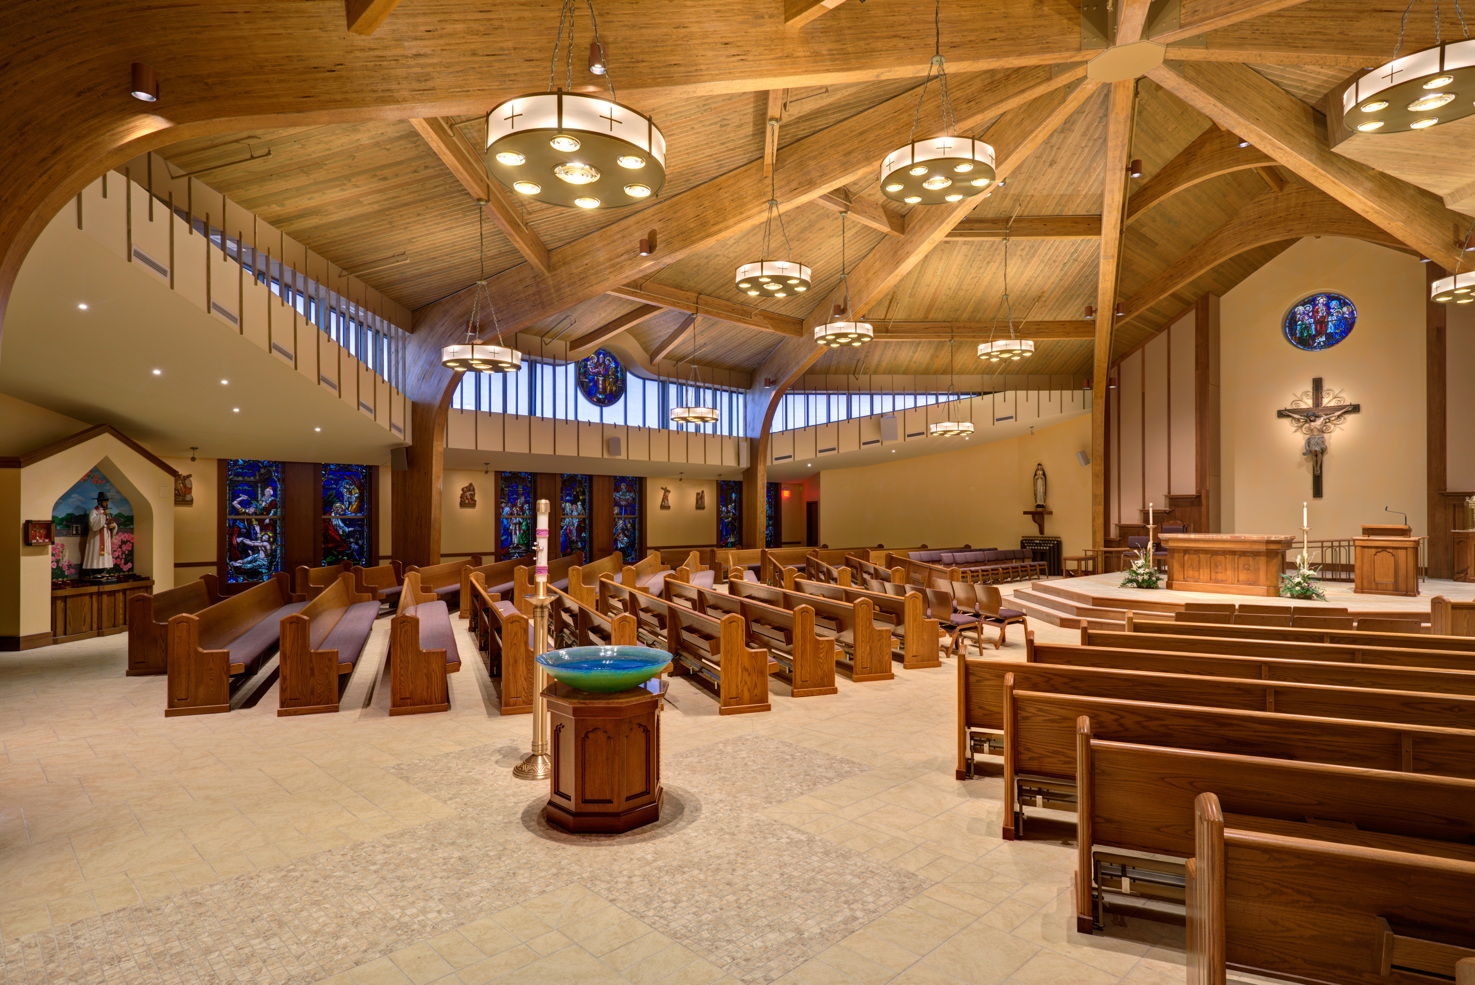 Side view of new worship space at St. Joseph Church by Foresight Architects